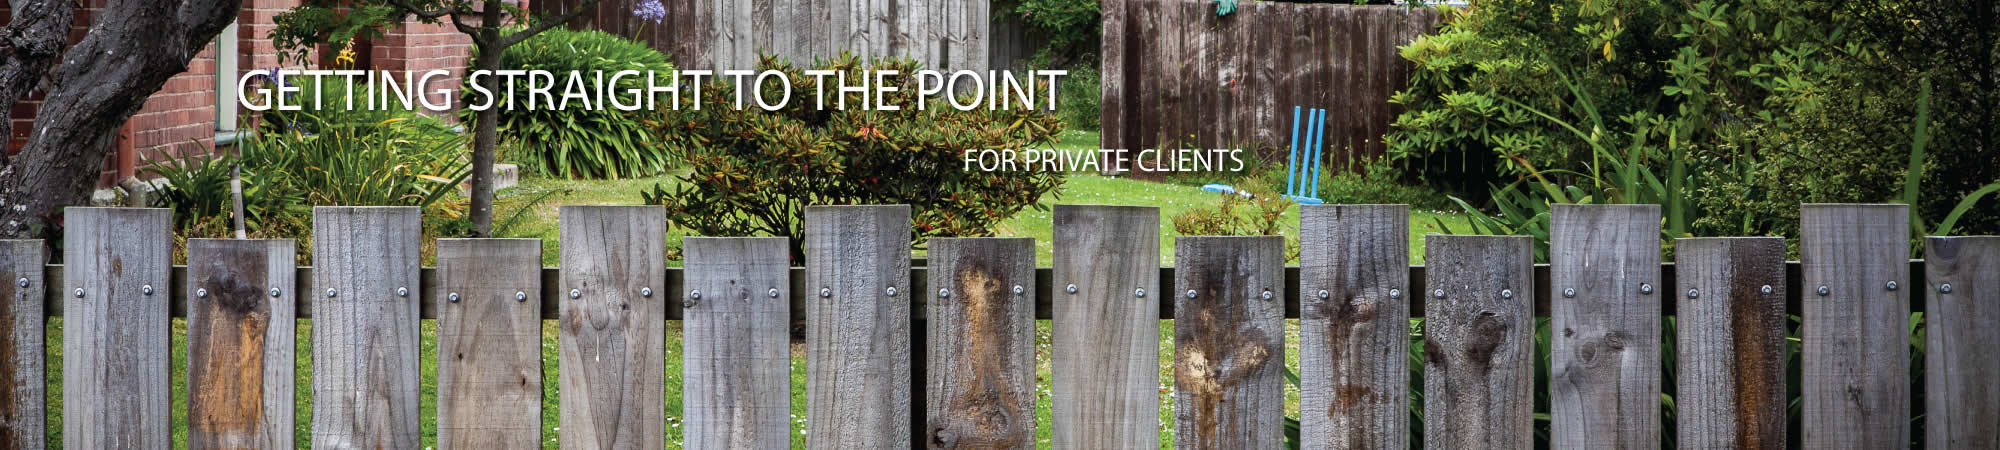 Getting straight to the point for private clients